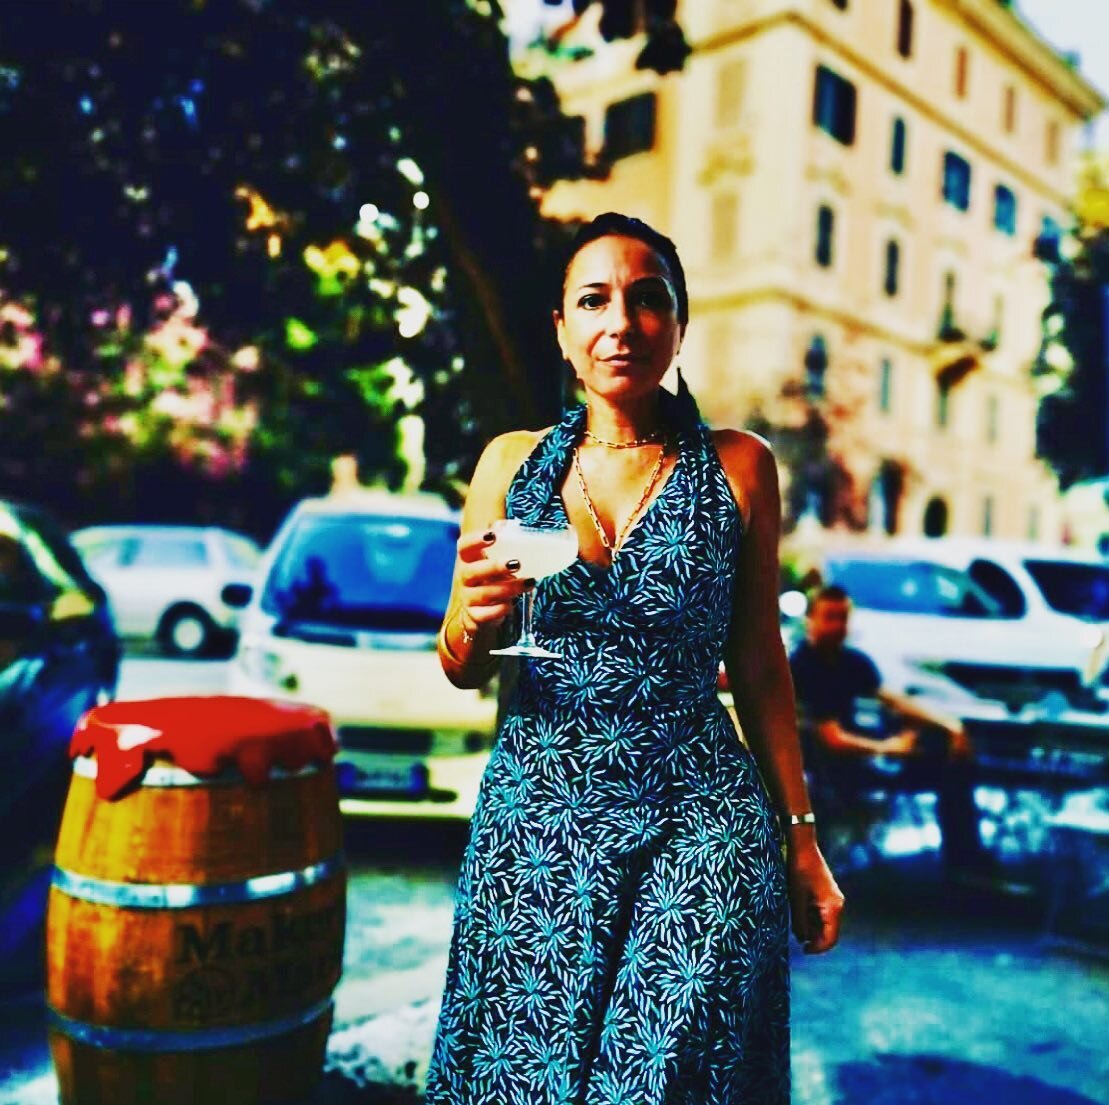 Valeria Bassetti bartender extraordinaire is our feature this week. The Roman firecracker 🧨 is busy with so many things! Check out the interview today!
Link in bio 3 pm CET.
.
.
.

#drinkstagram #drinks #cocktails #mixology #cocktail #drink #bartend